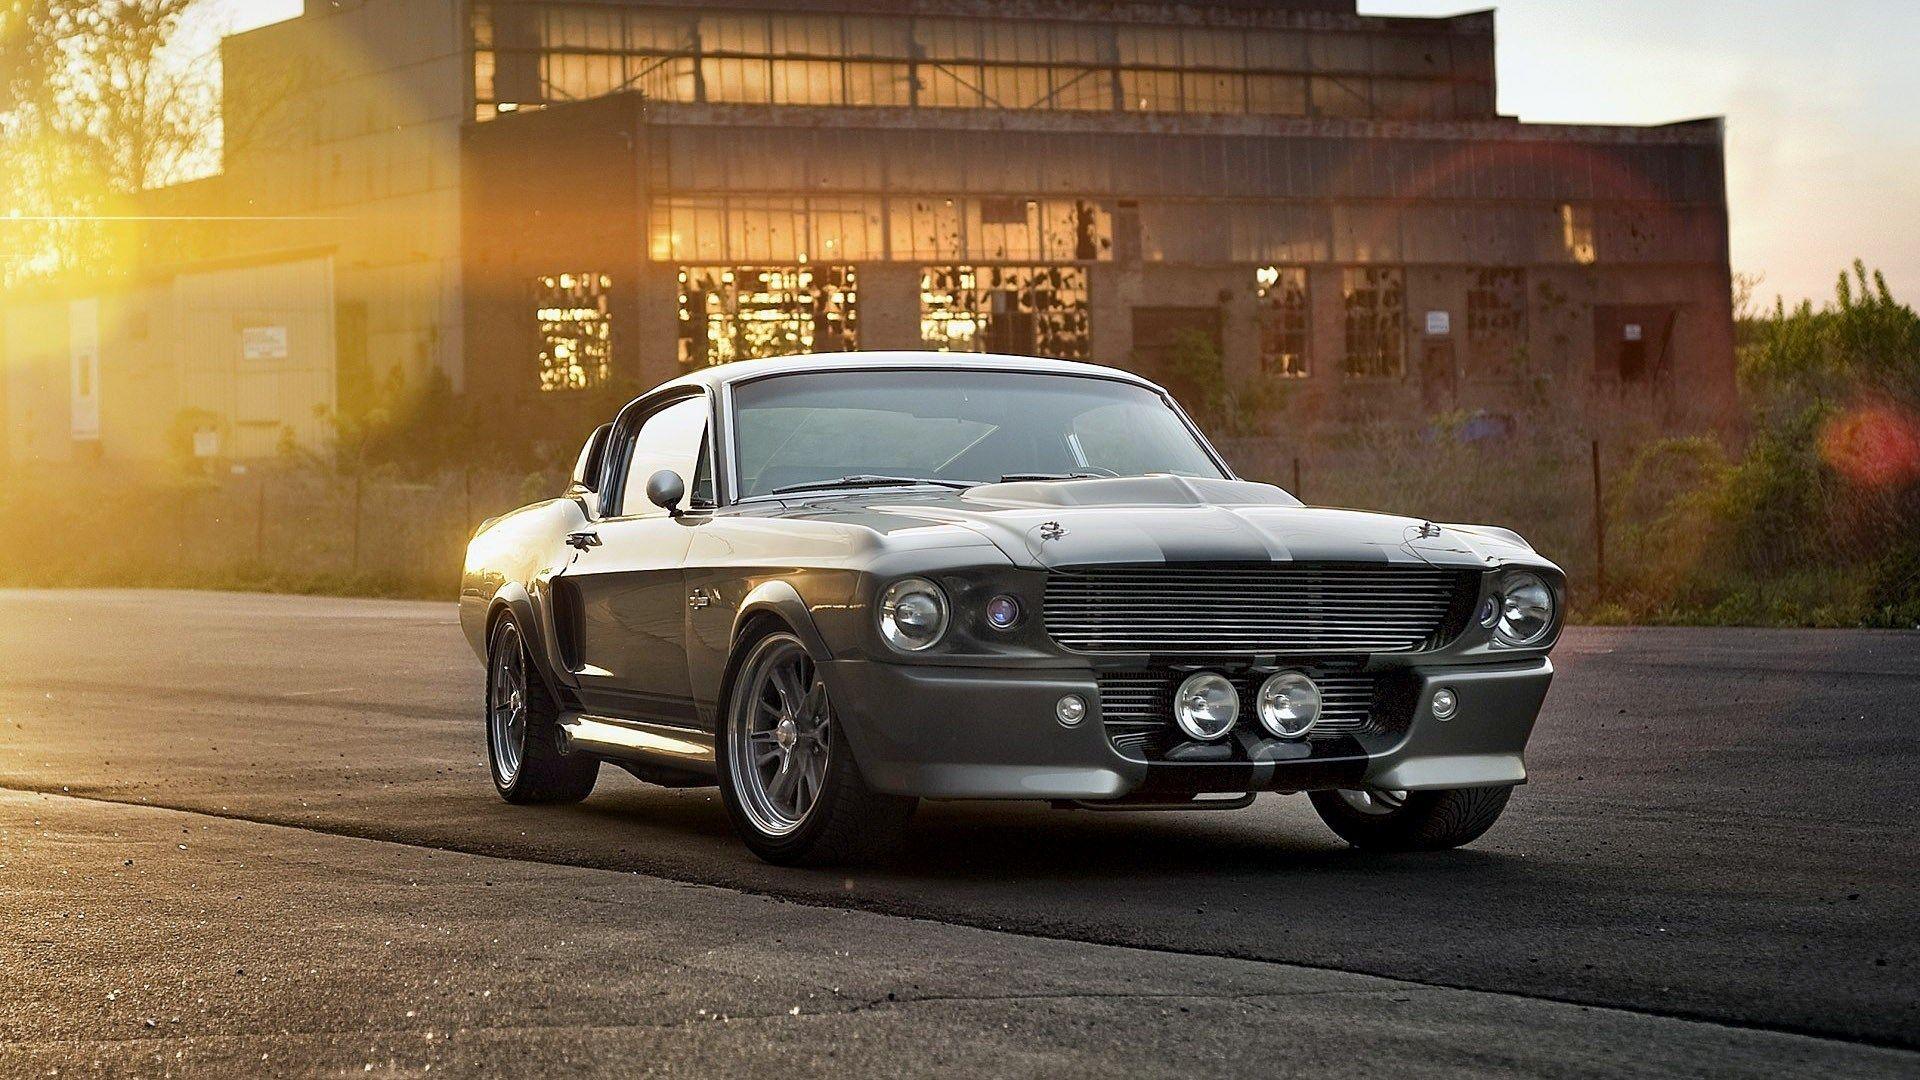 Classic Ford Mustang Wallpaper · iBackgroundWallpaper